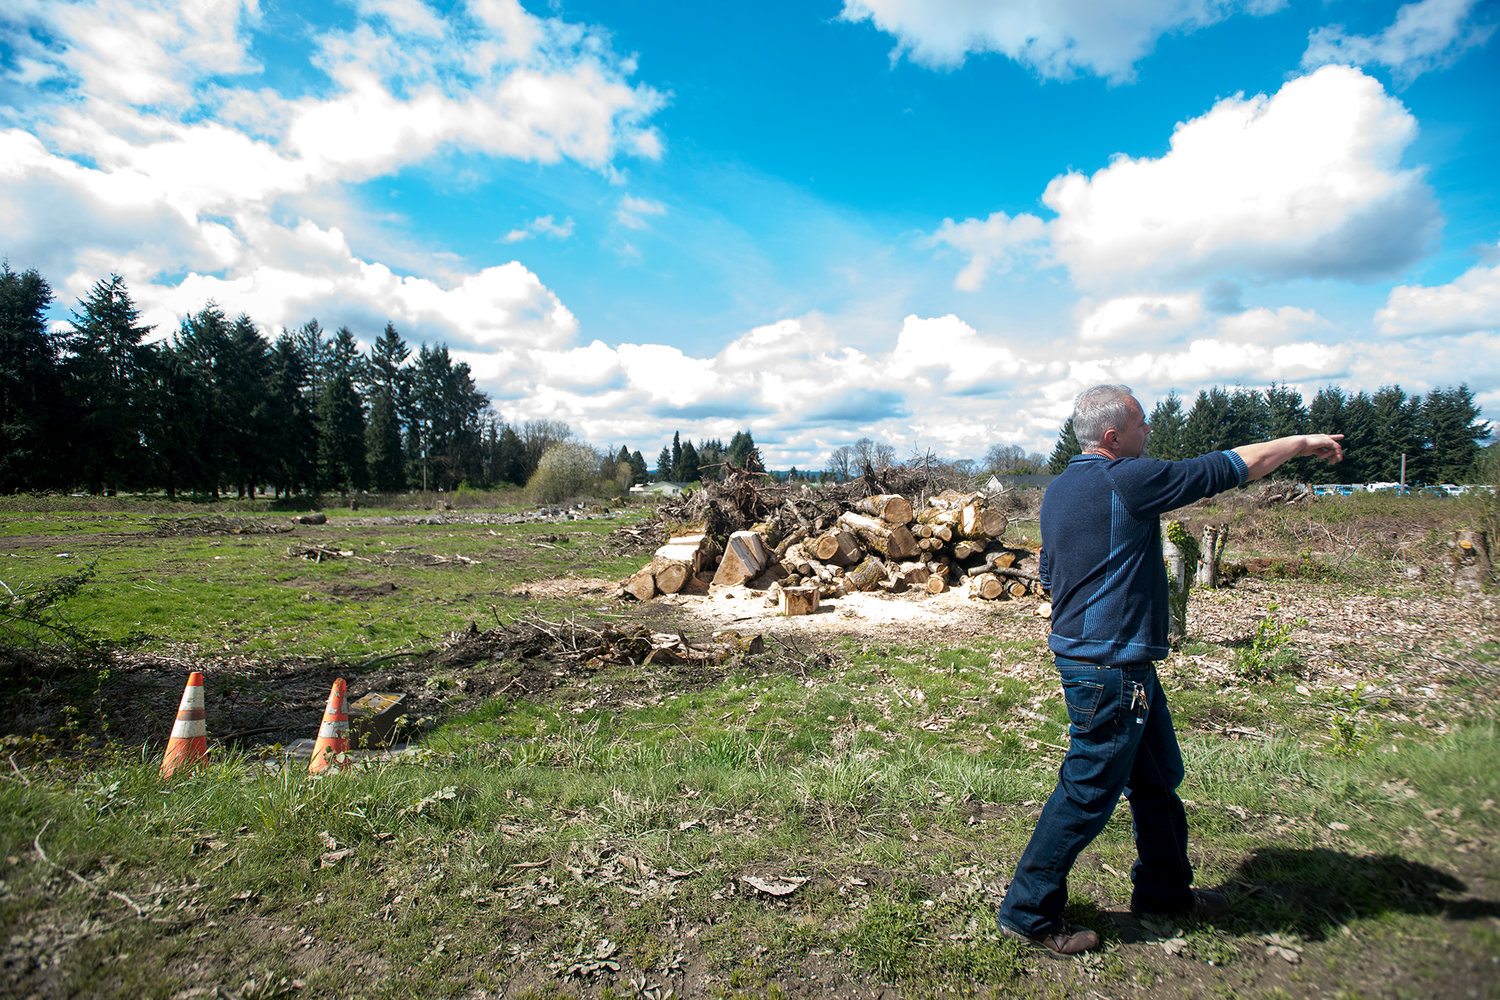 David Kois points to the towards a crop of trees that signifies the end of his property line of the land that he plans to lease for his marijuana grow facility off of Reynolds Road in Centralia on Monday afternoon.